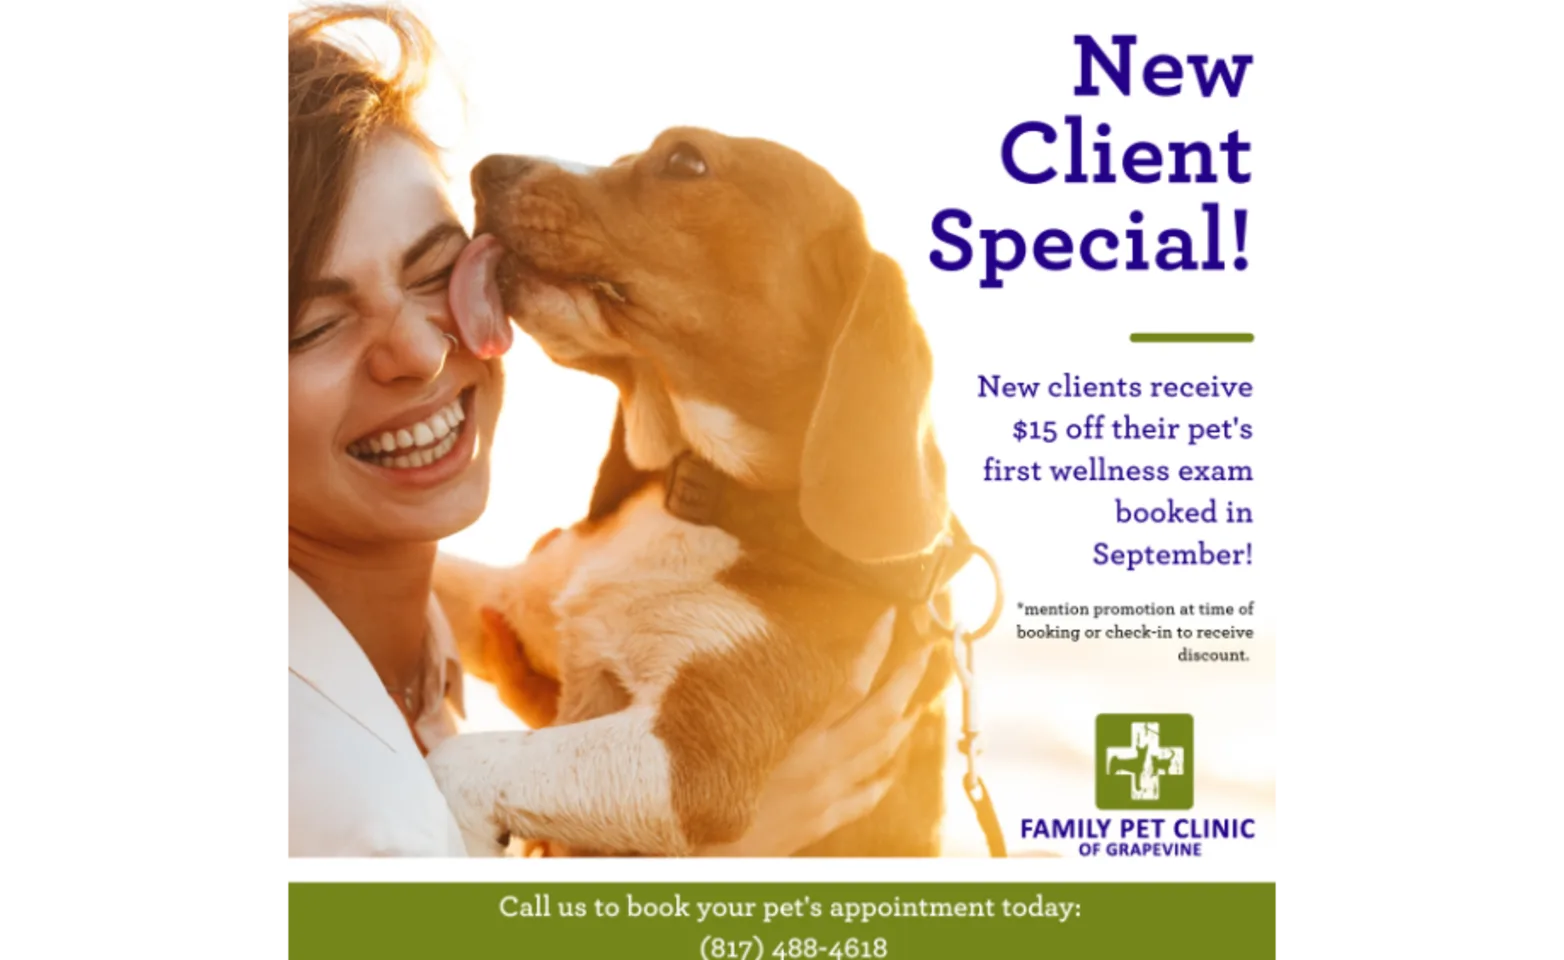 Brown dog licking a girls face - New Client Special promotion flyer